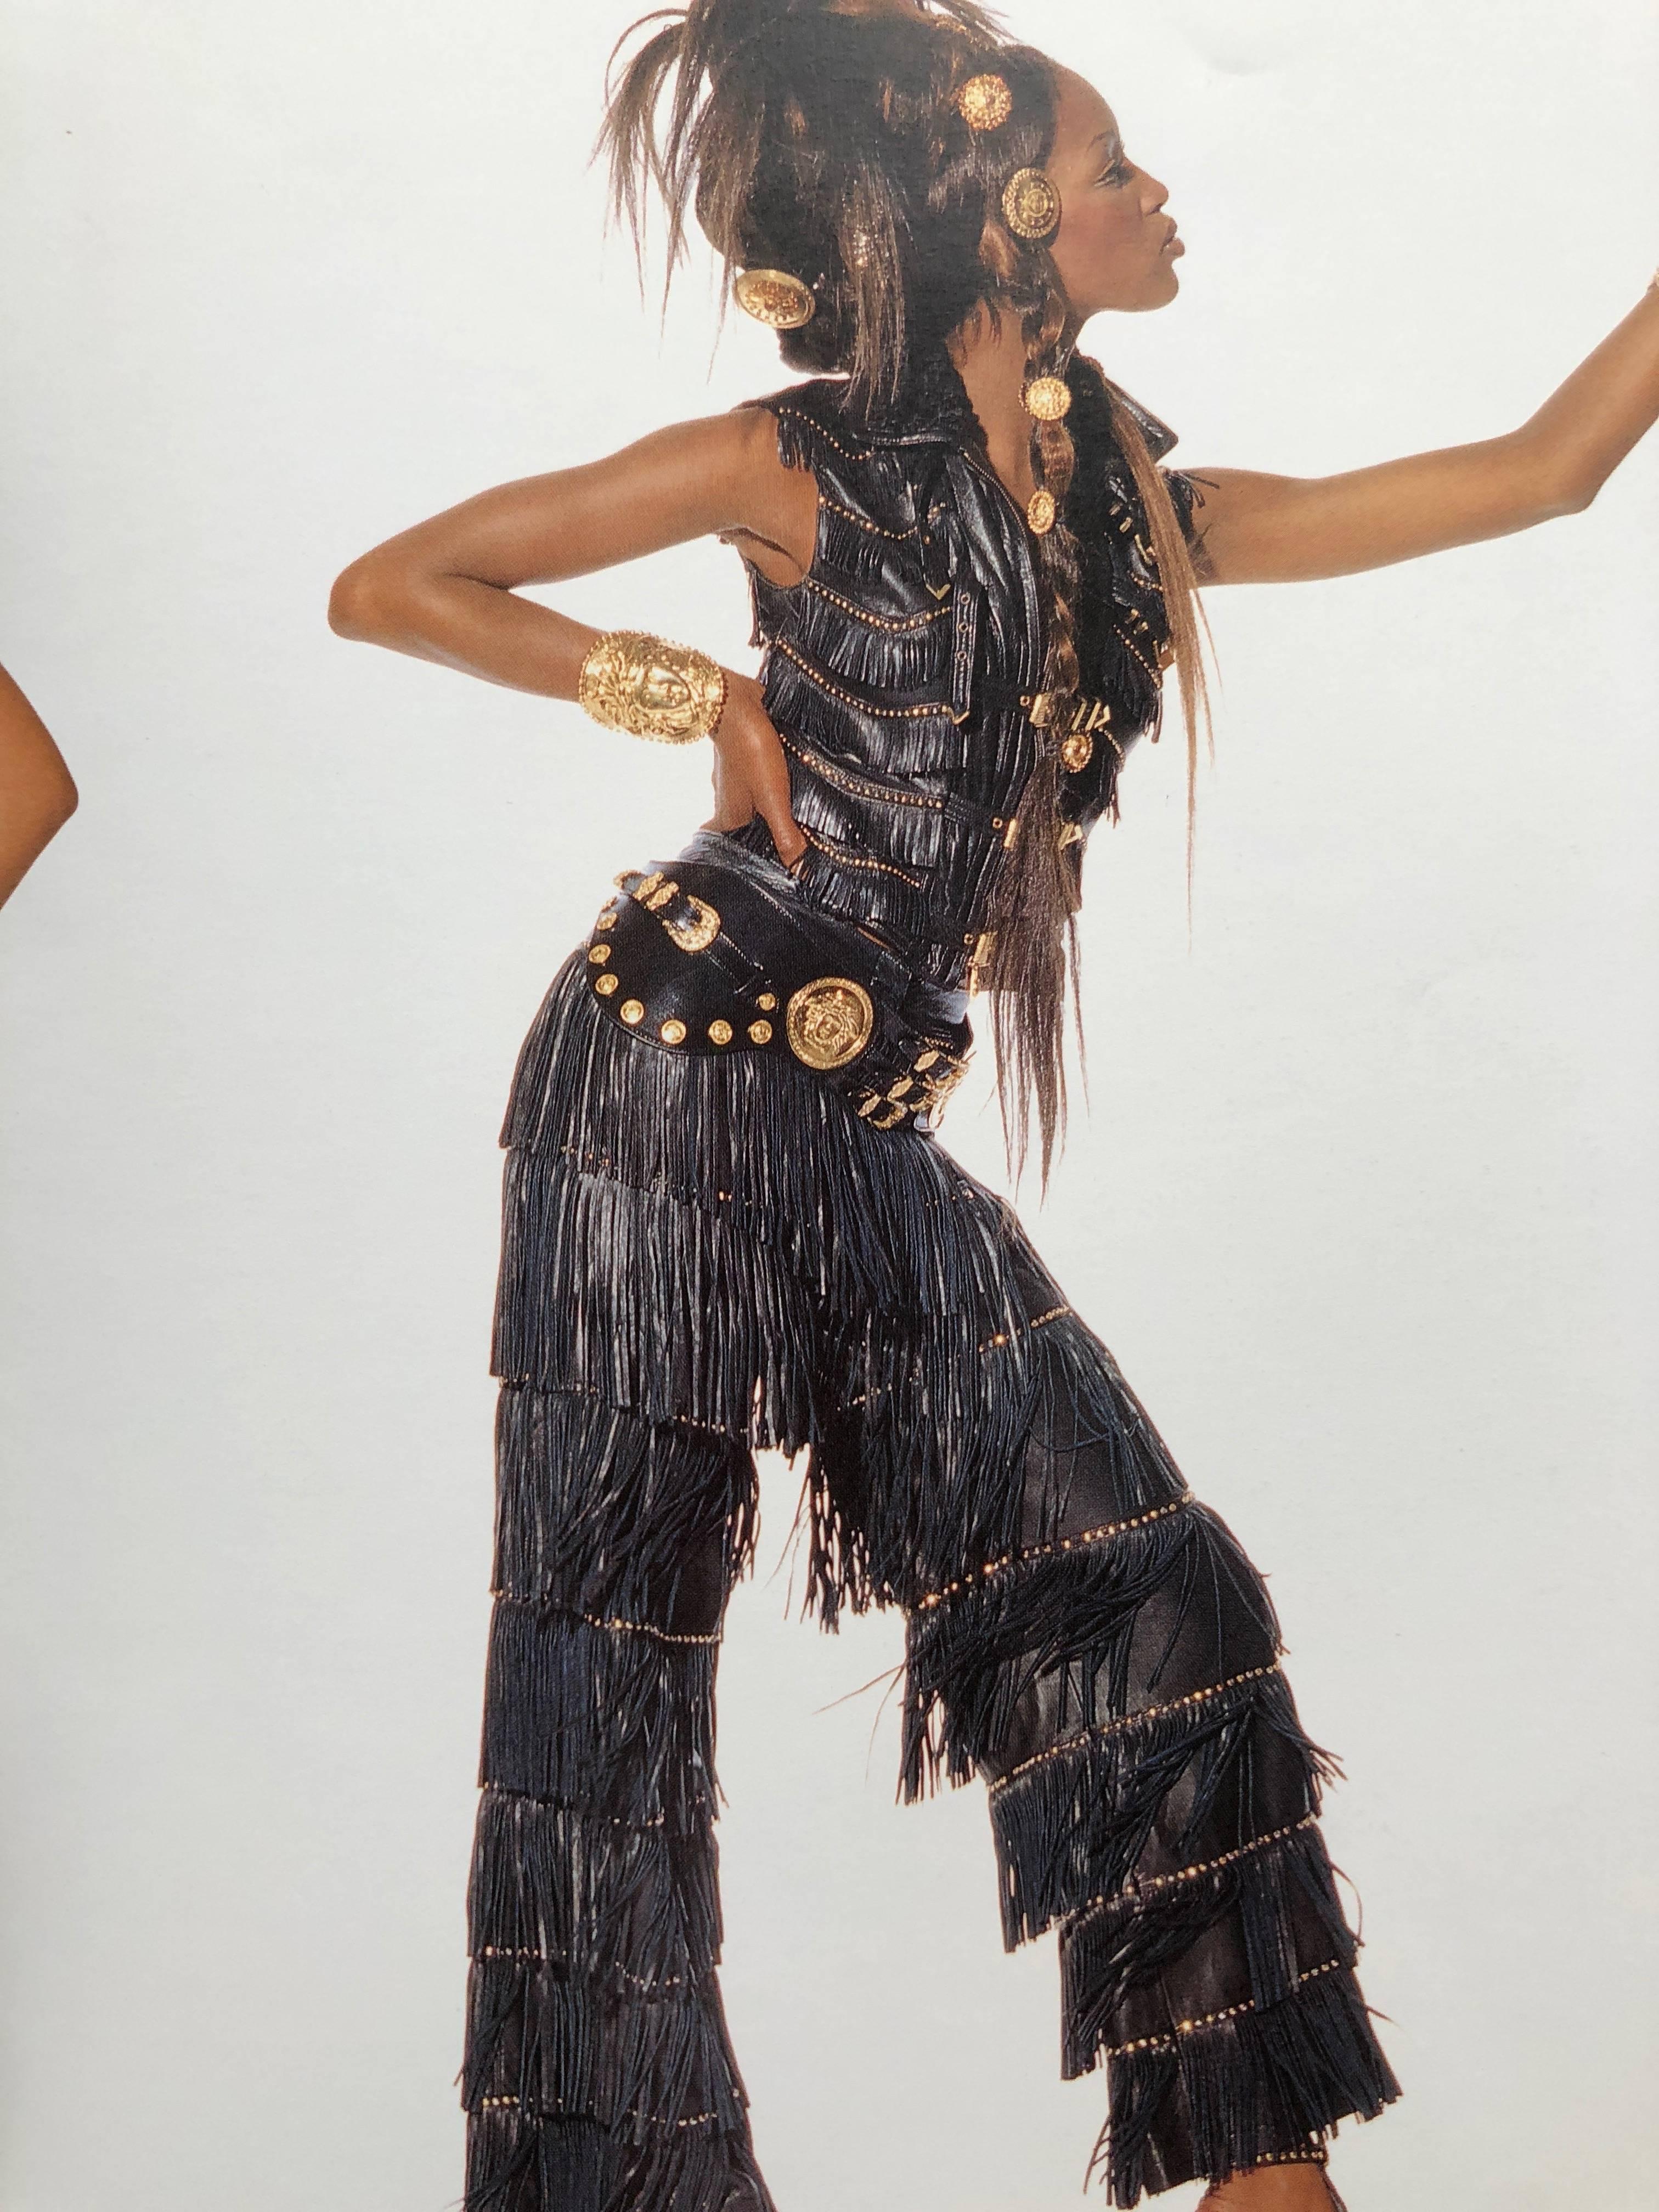 Gianni Versace Book No. 23 Irving Penn Autumn 1993 Bondage  All the Supermodels
Gianni Versace documented every collection in the beginning of his career , hiring the best photographers and stylists.
This is the infamous bondage collection,